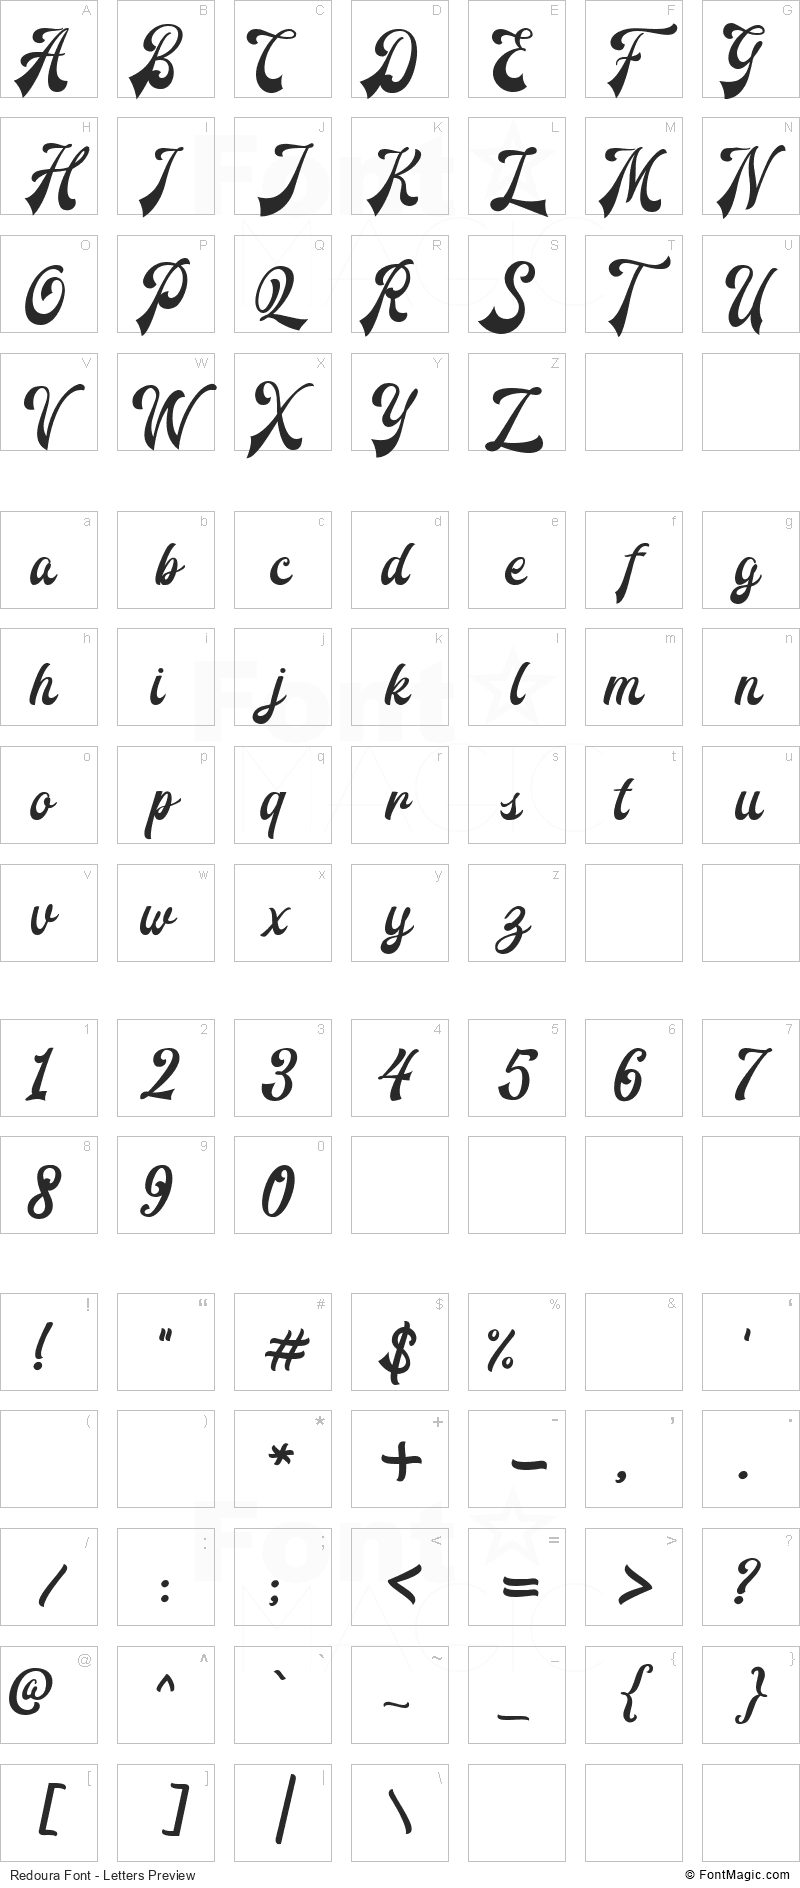 Redoura Font - All Latters Preview Chart